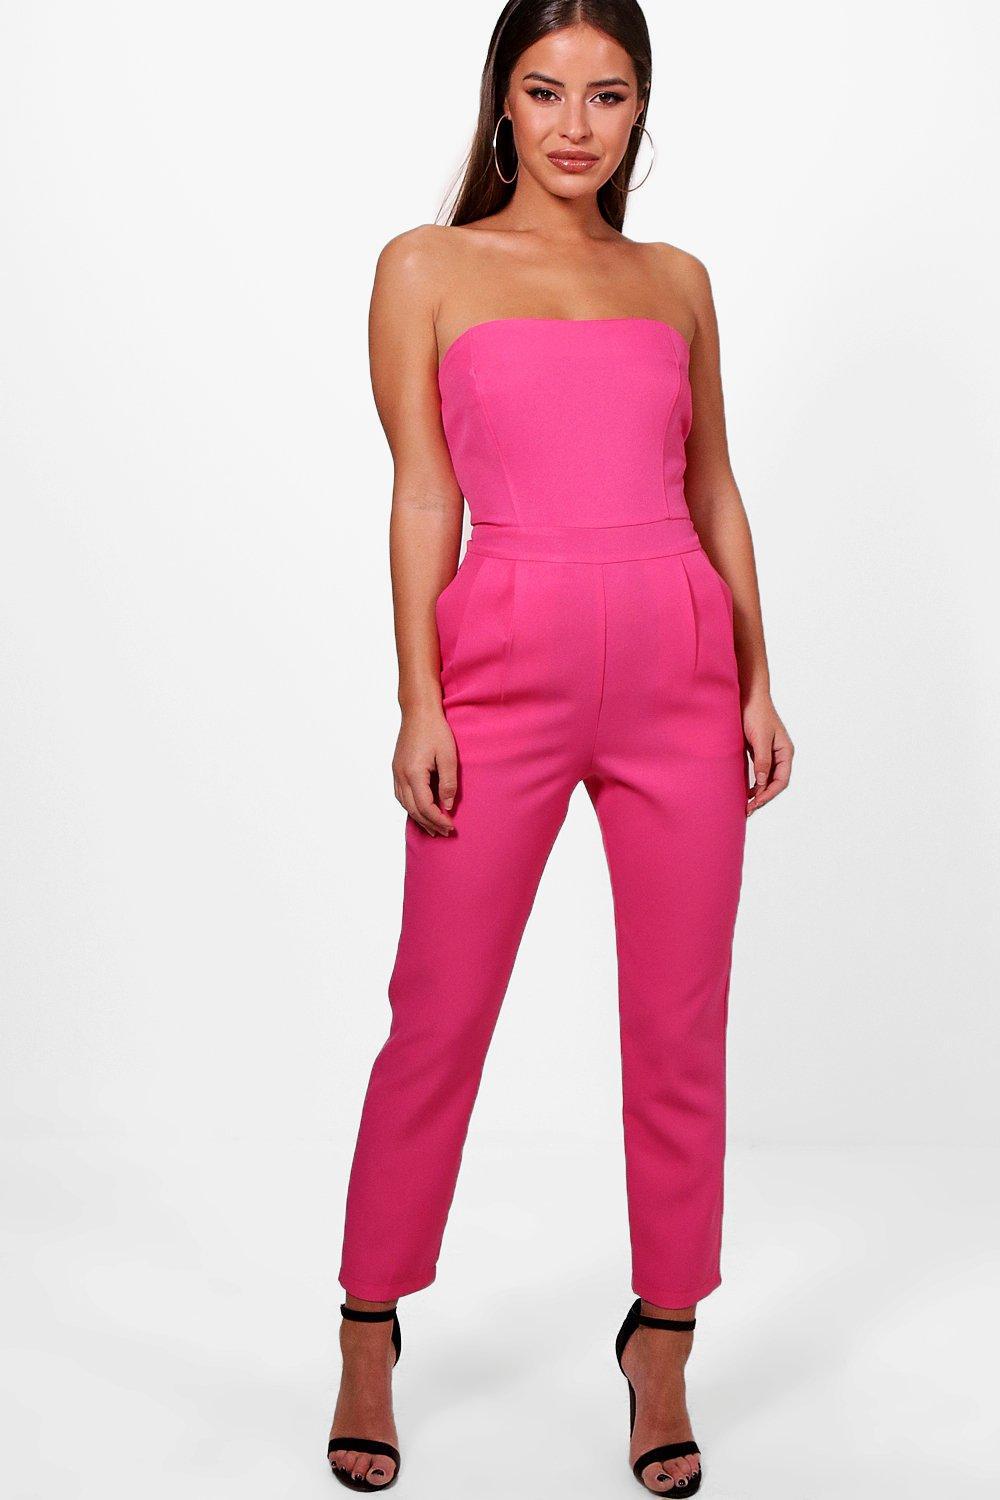 Boohoo Synthetic Petite Bandeau Tailored Jumpsuit in Hot Pink (Pink) - Lyst